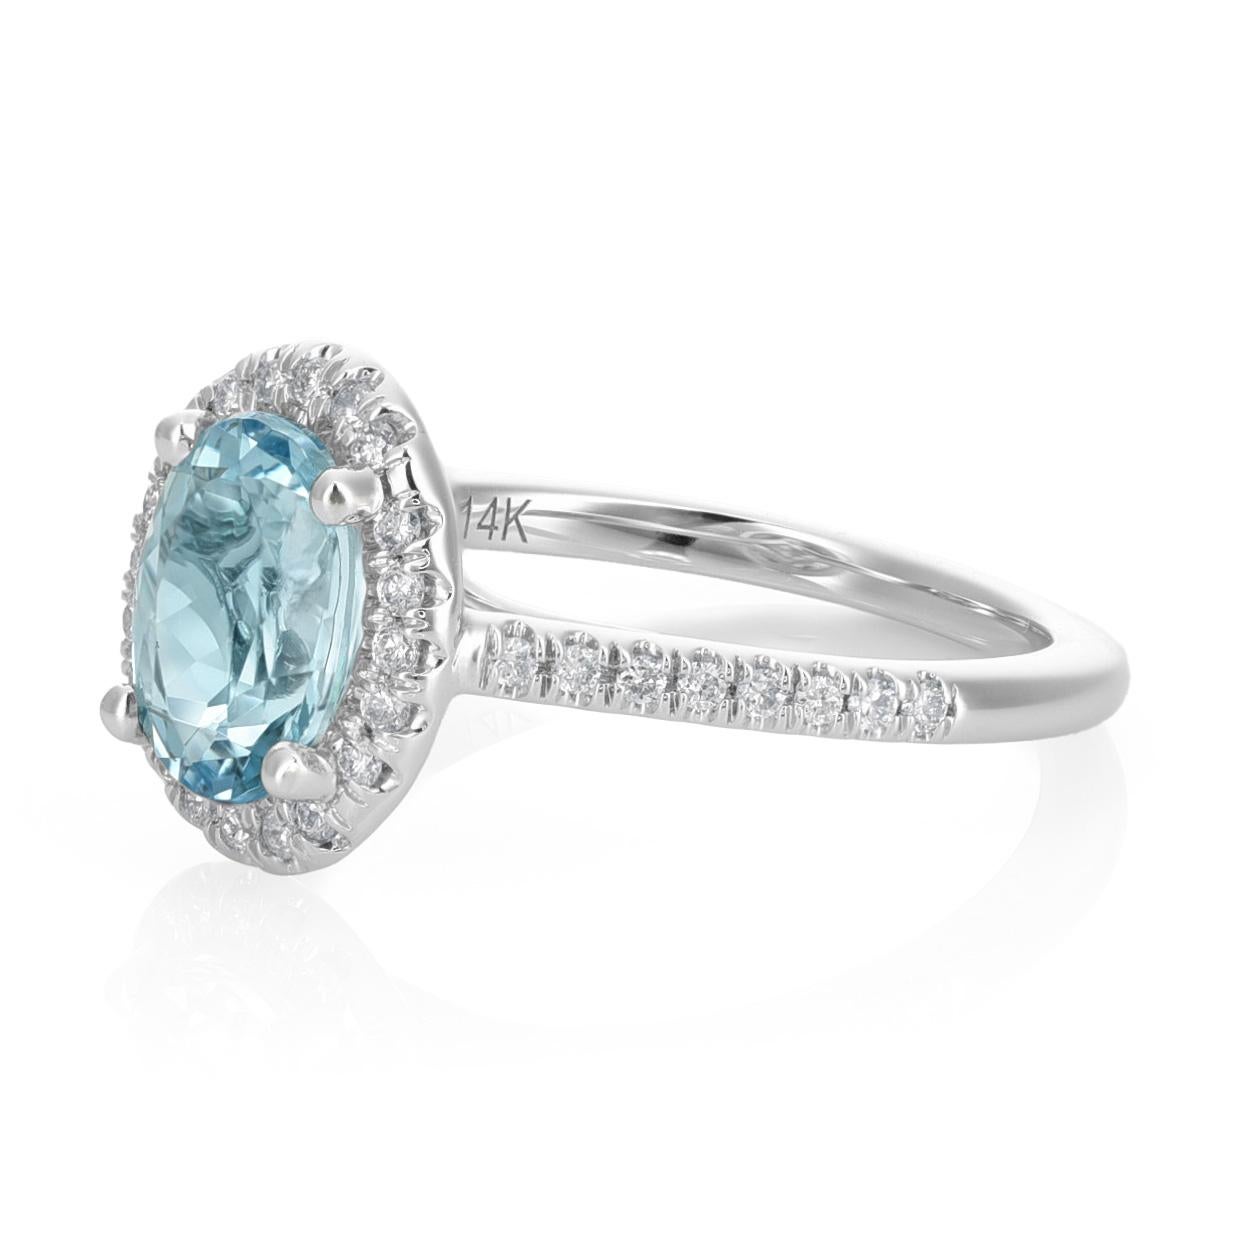 Elevate your style with this enchanting 14K White Gold Ring featuring a 1.02-carat natural Aquamarine in an elegant oval shape. The soothing blue hue of the Aquamarine is enhanced through a heating process, adding depth to its beauty. The graceful